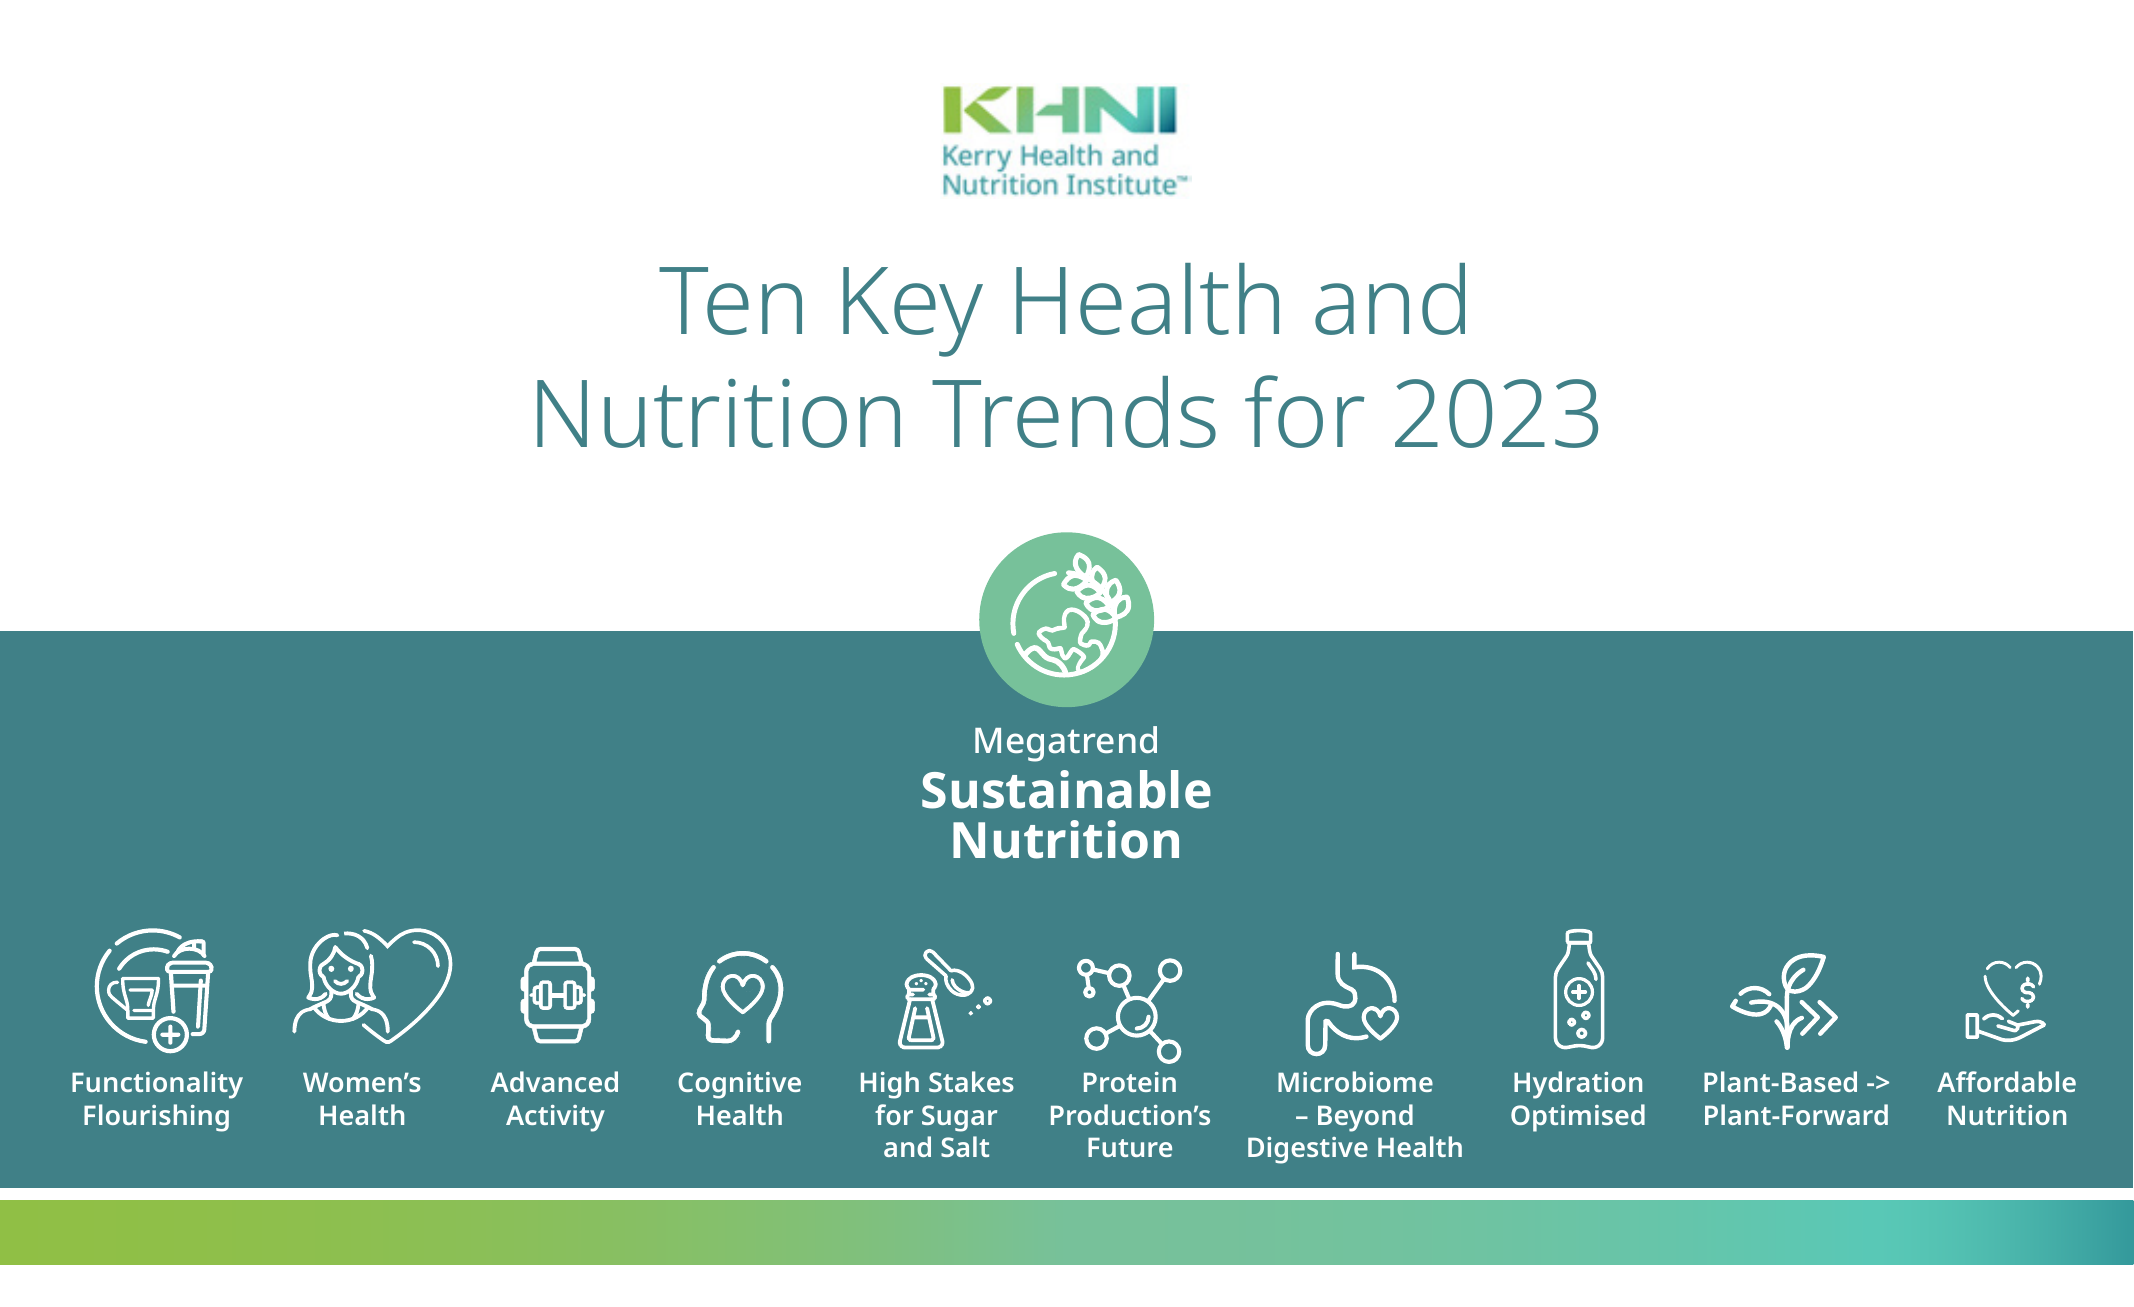 Ten Key Health and Nutrition Trends for 2023 - KHNI